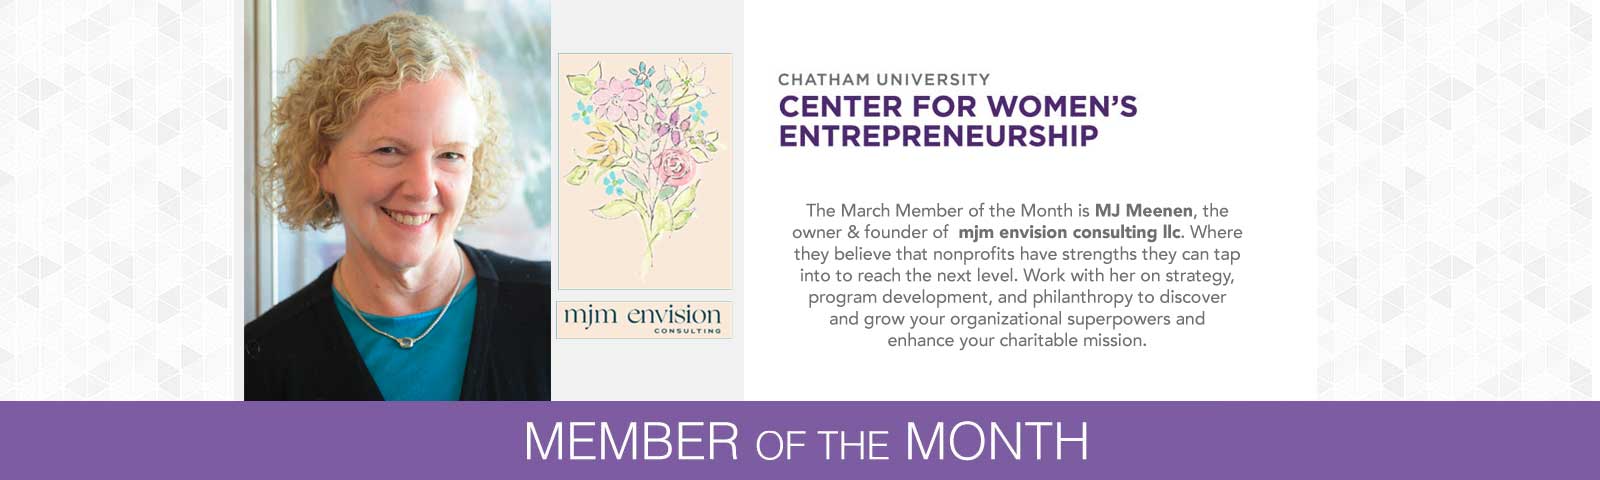 The March Member of the Month is MJ Meenen, the owner & founder of  mjm envision consulting llc. Where they believe that nonprofits have strengths they can tap into to reach the next level.  Work with her on strategy, program development, and philanthropy to discover and grow your organizational superpowers and enhance your charitable mission.